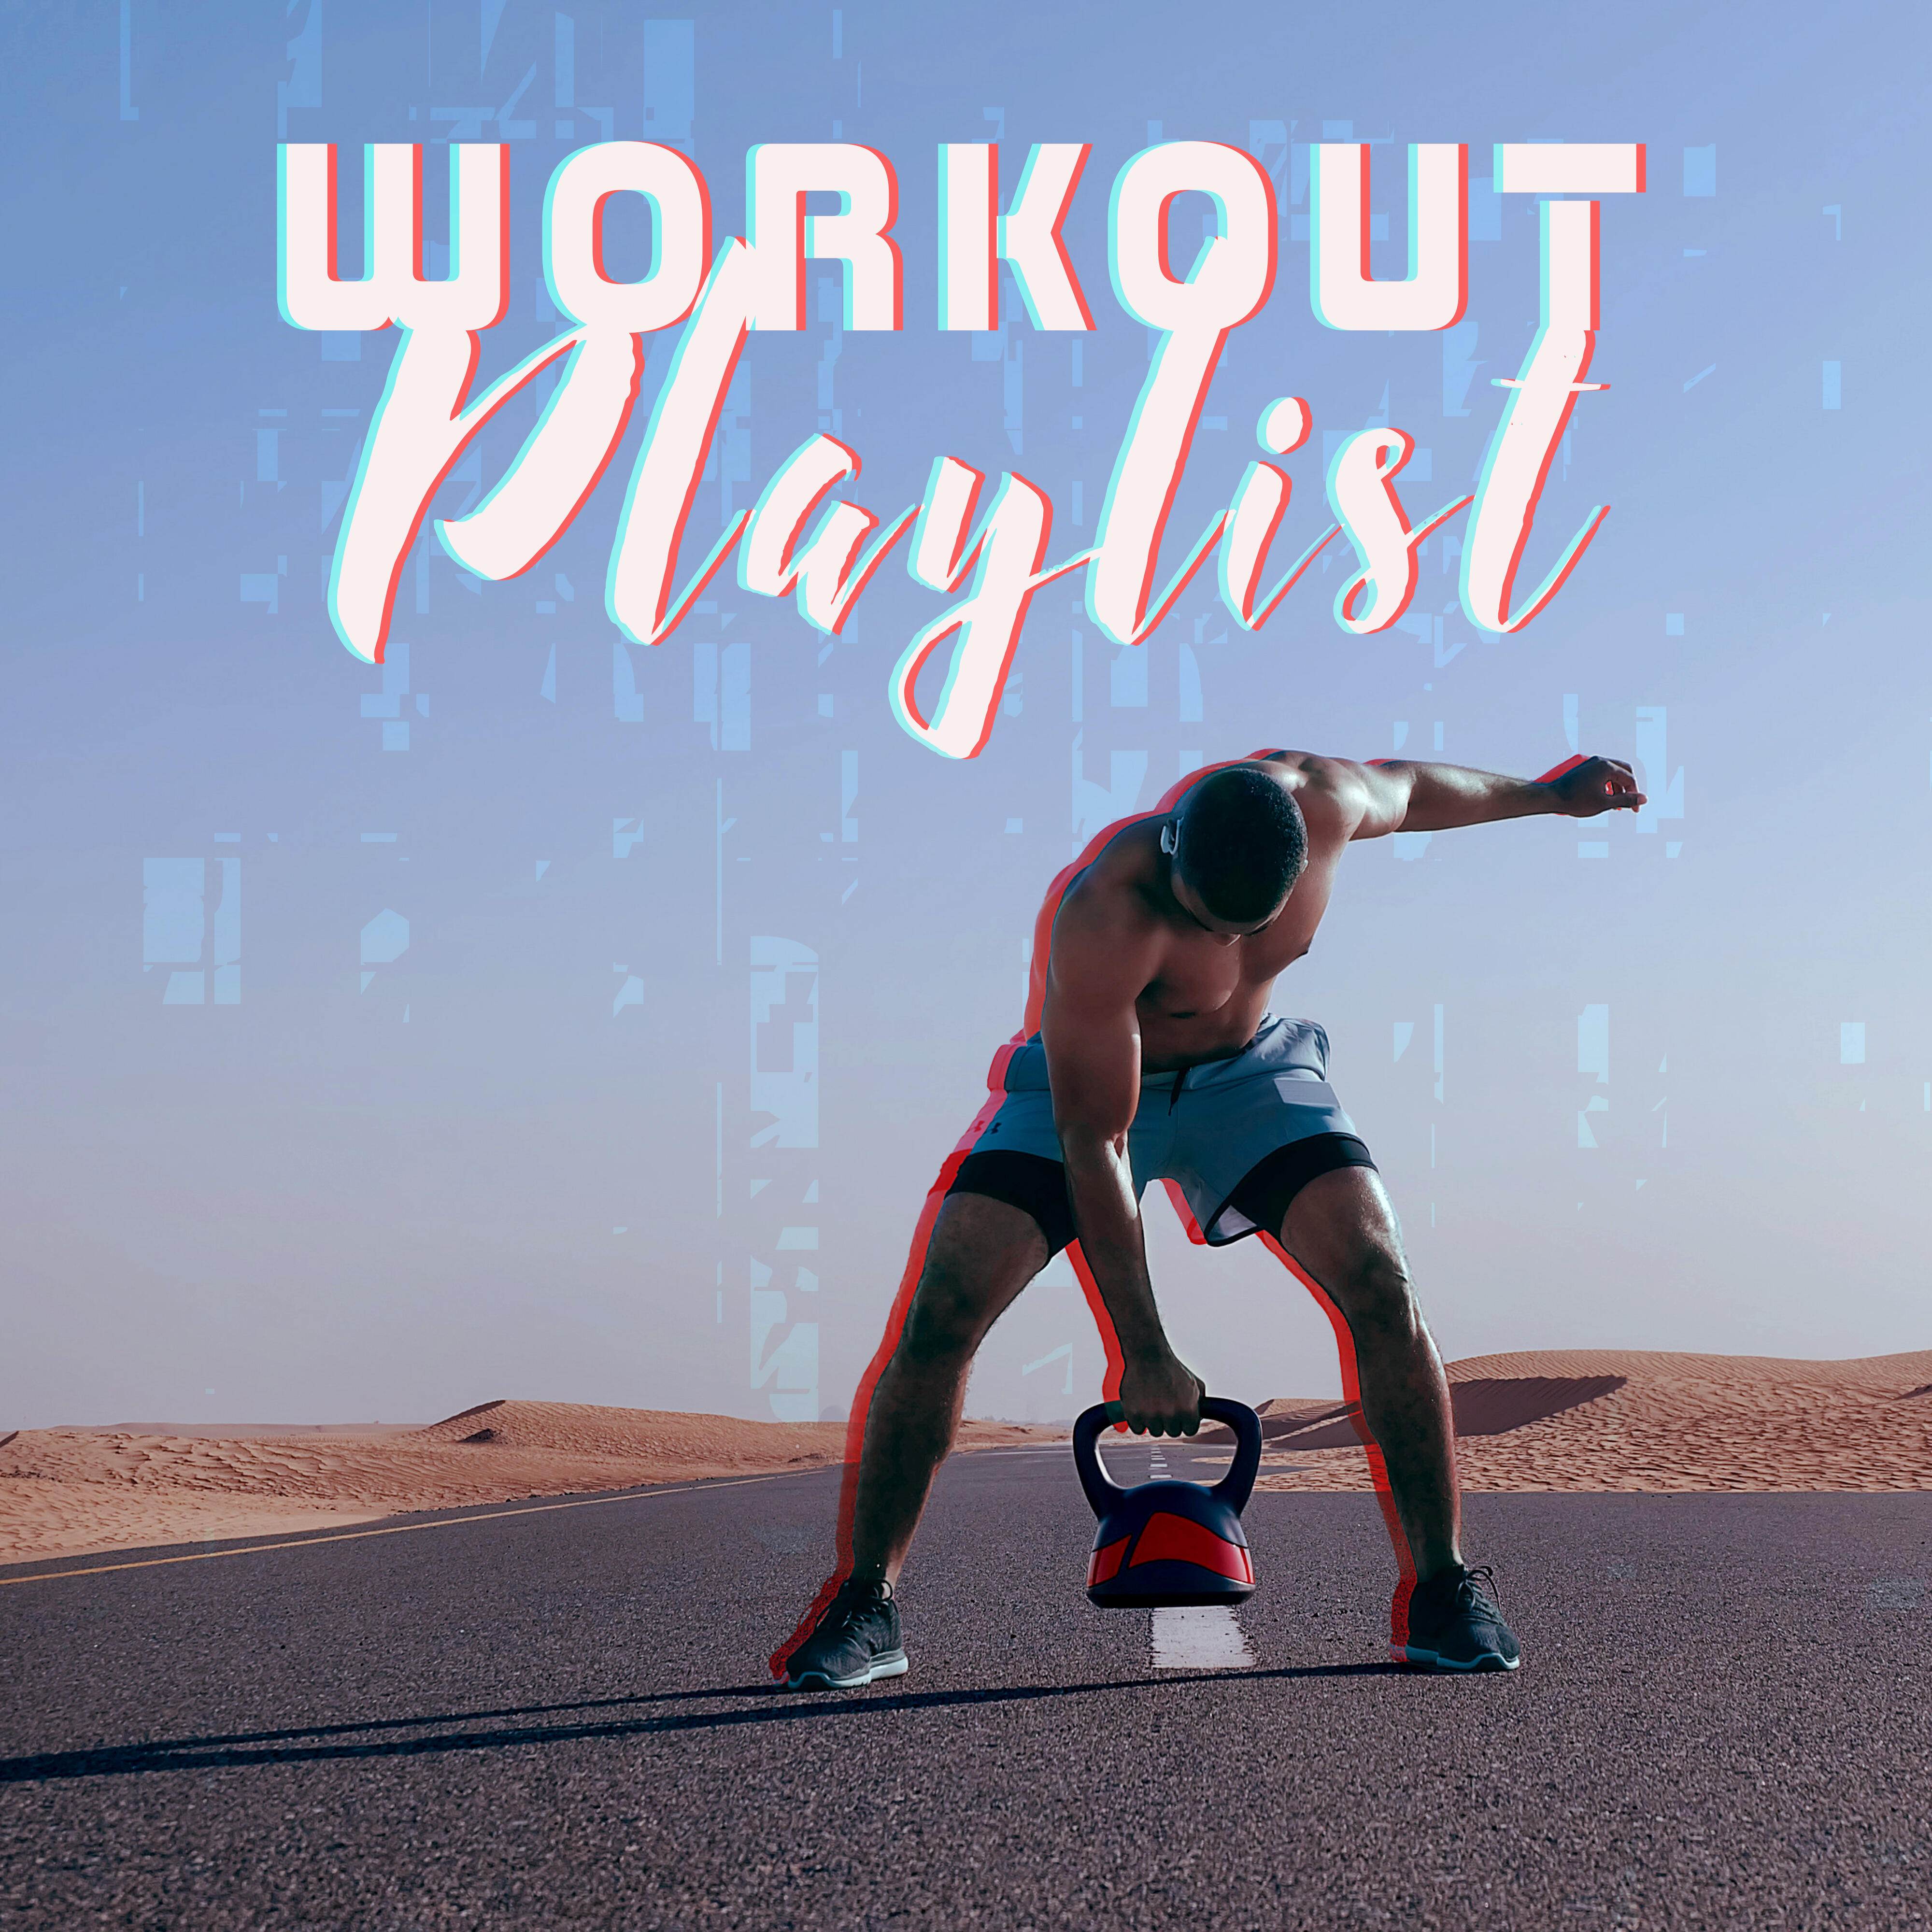 Top 40 Workout Playlist iHeart